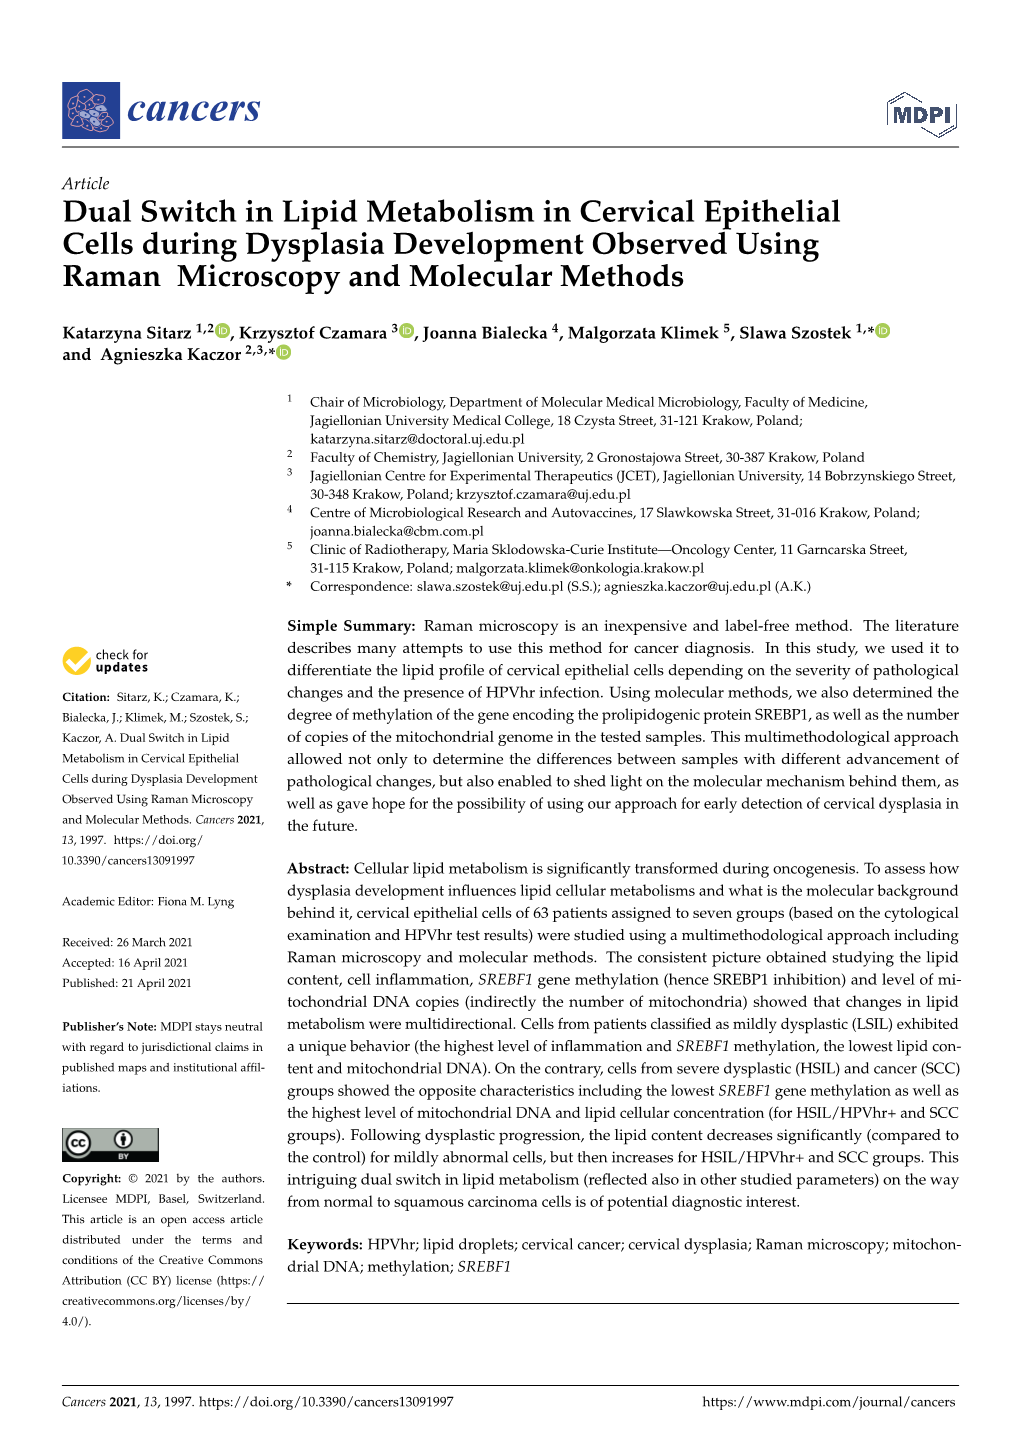 Dual Switch in Lipid Metabolism in Cervical Epithelial Cells During Dysplasia Development Observed Using Raman Microscopy and Molecular Methods